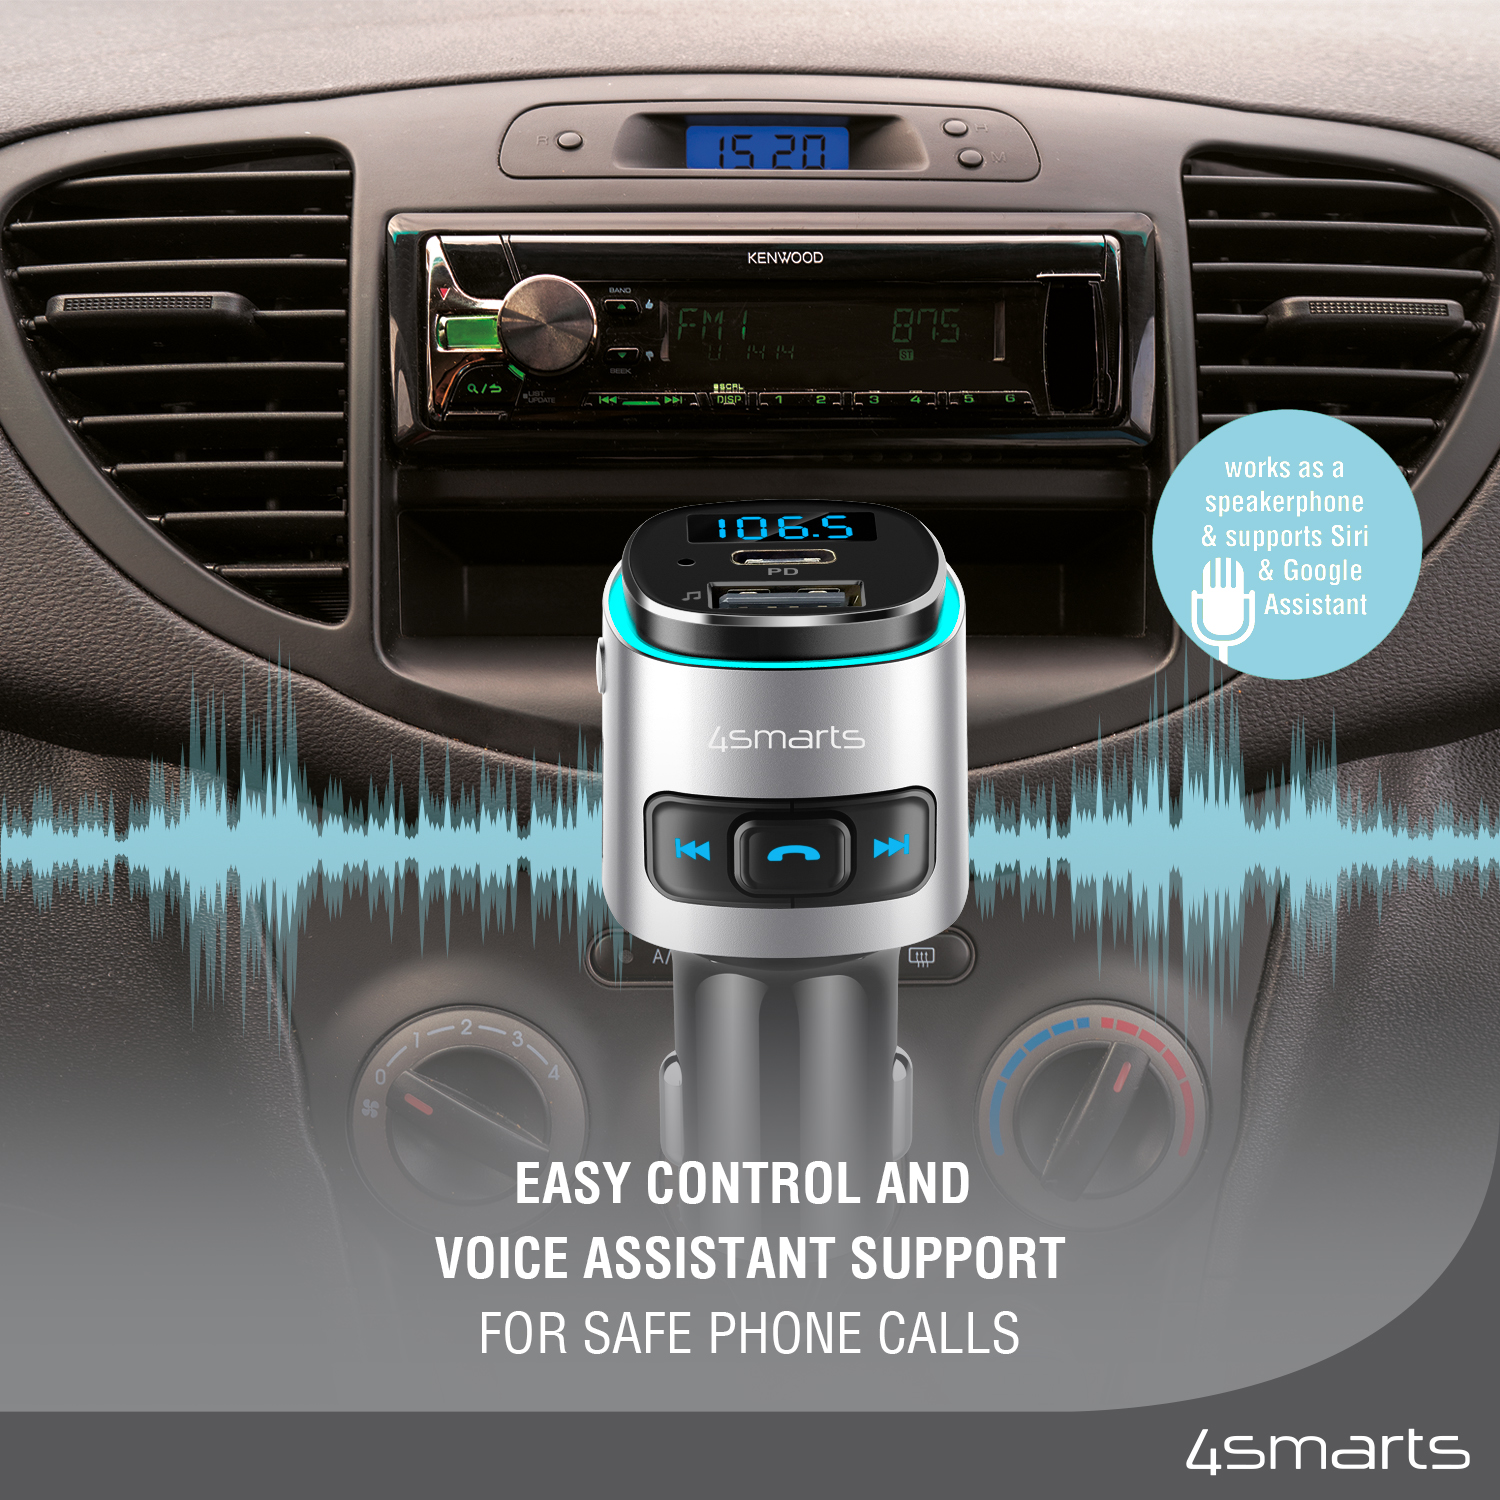 The 4smarts Bluetooth Transmitter Media&Assist 2's built-in speakerphone simplifies operation and the voice assistant ensures safe phone calls.